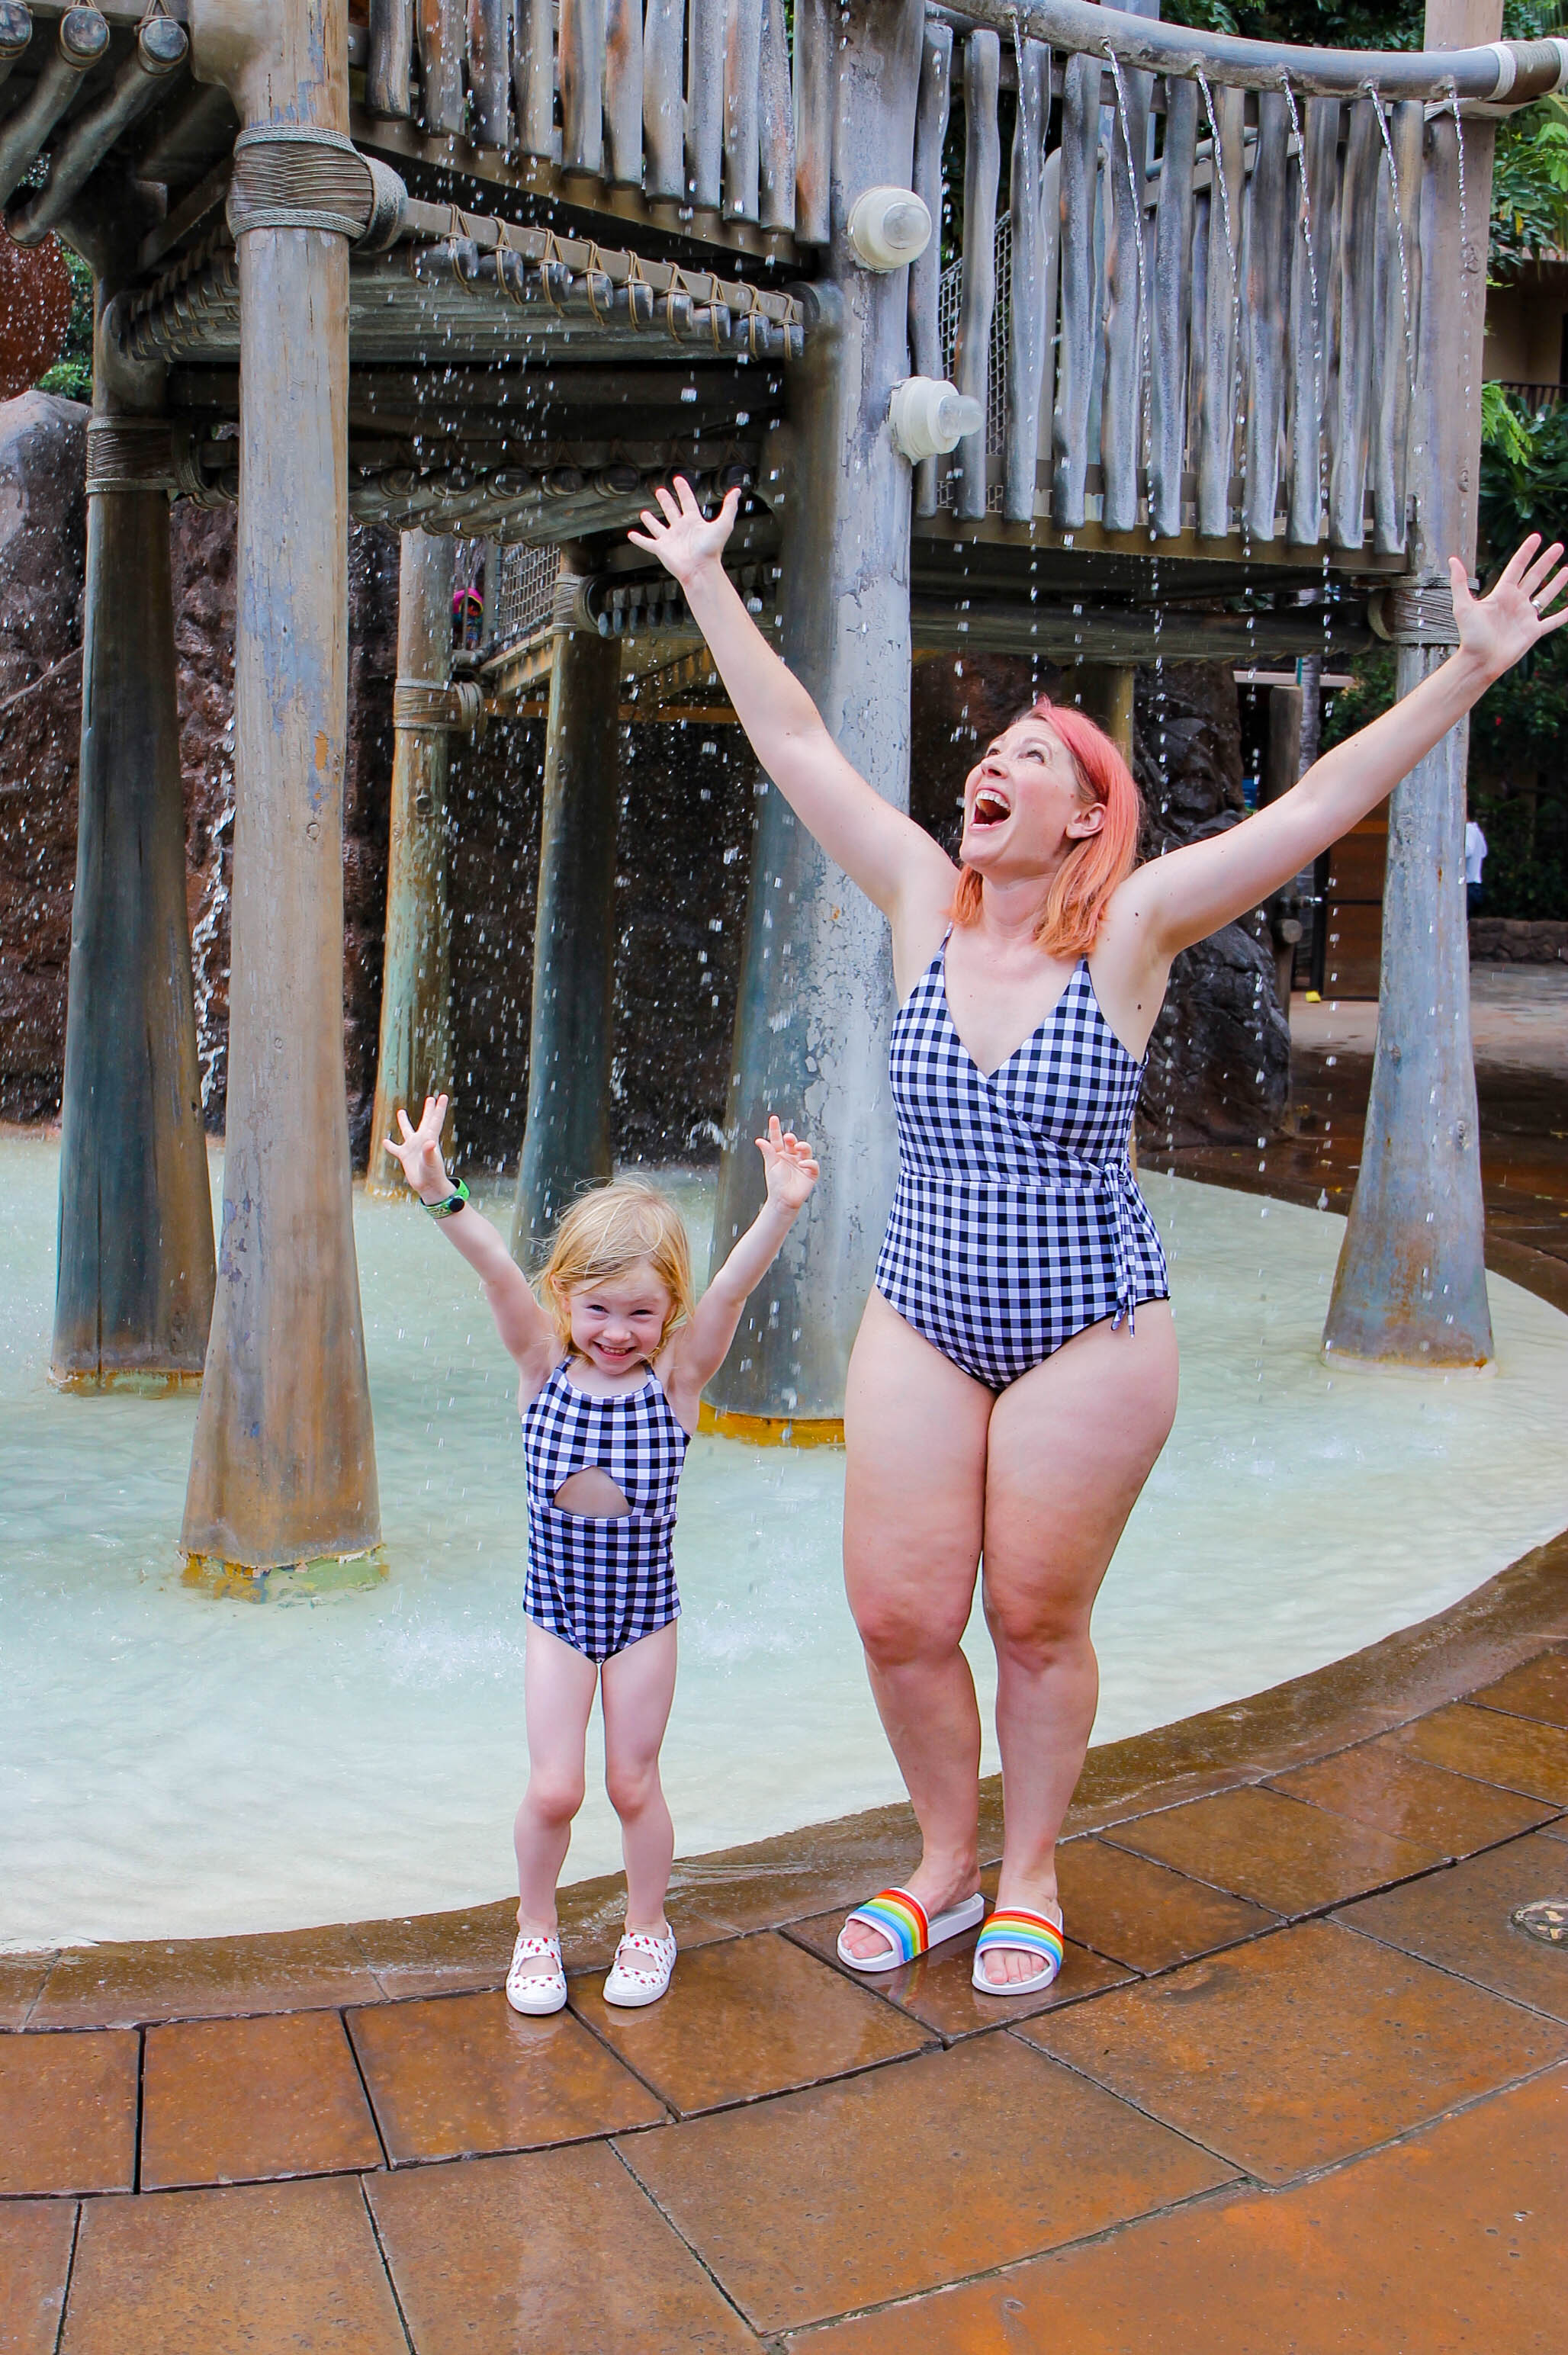 Disney Aulani: This splash pad and water park area is a MUST do for toddlers and preschoolers!